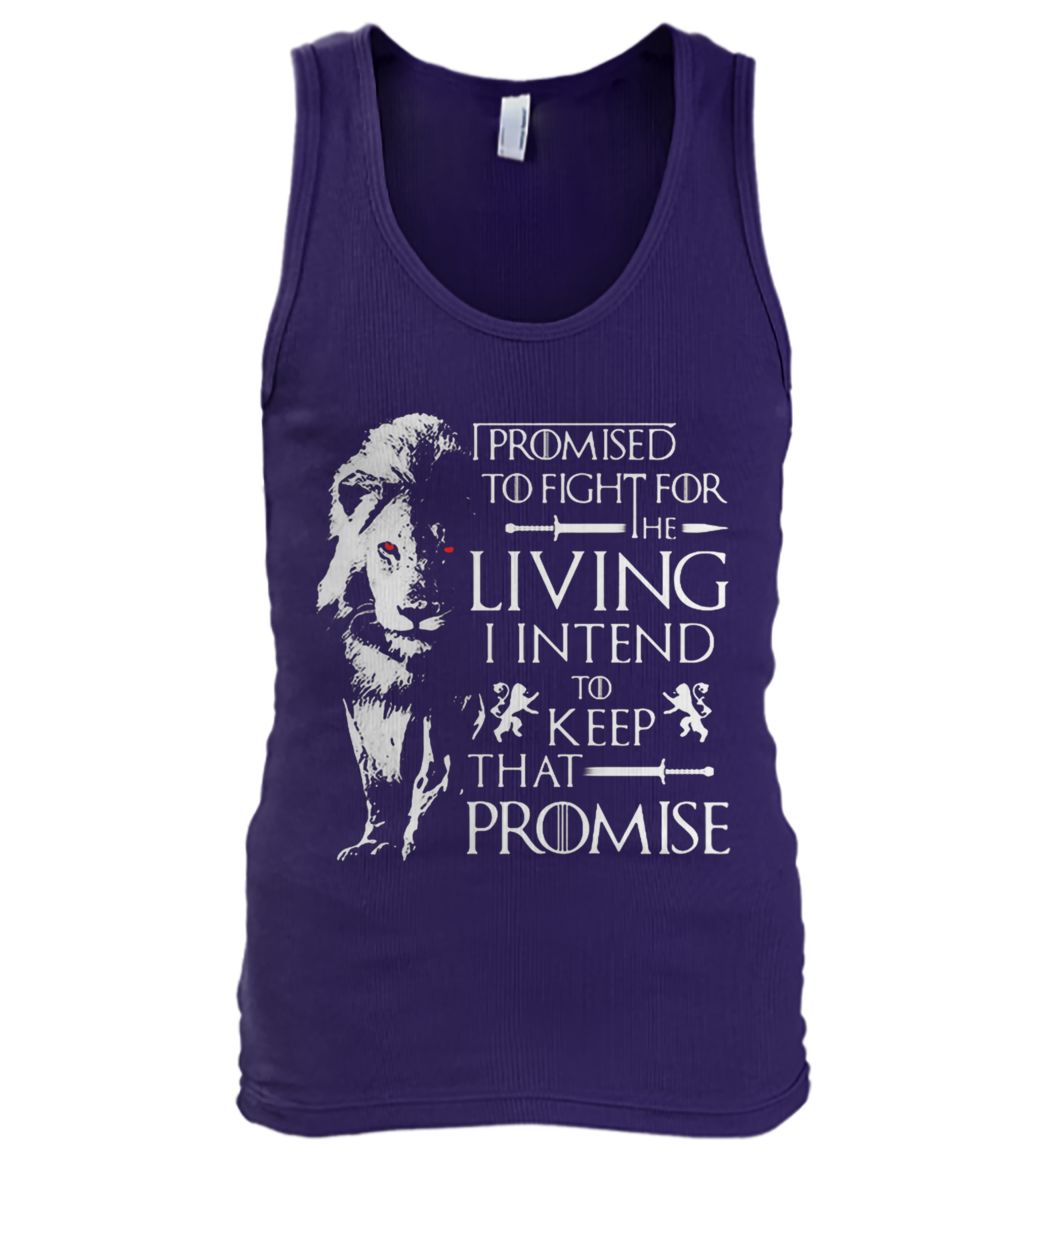 Game of thrones jaime lannister lion I promised to fight for the living I intend to keep that promise men's tank top